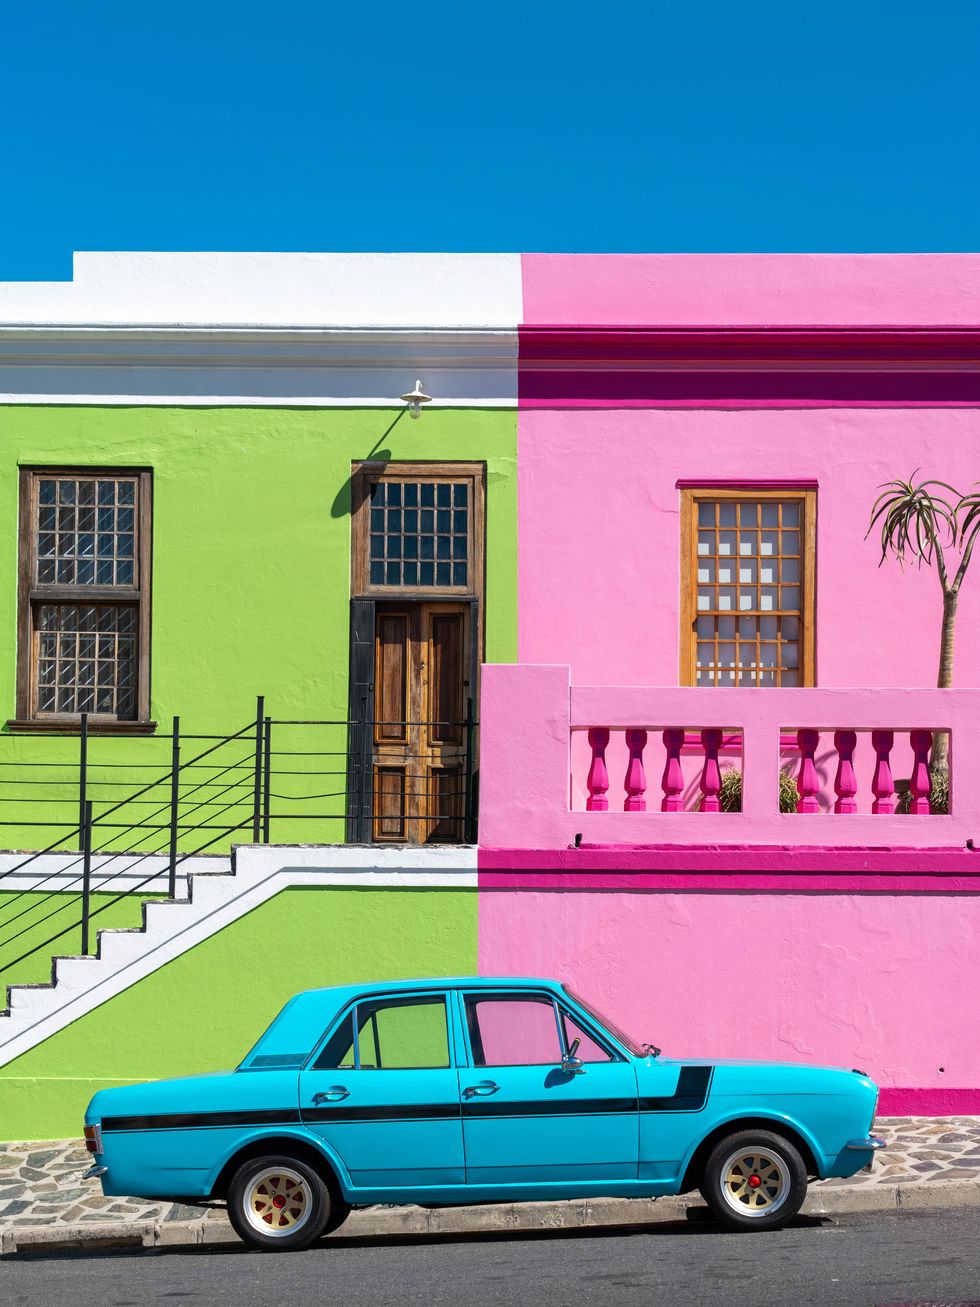 vintage car in the historic bo kaap neighbourhood, cape town, south africa